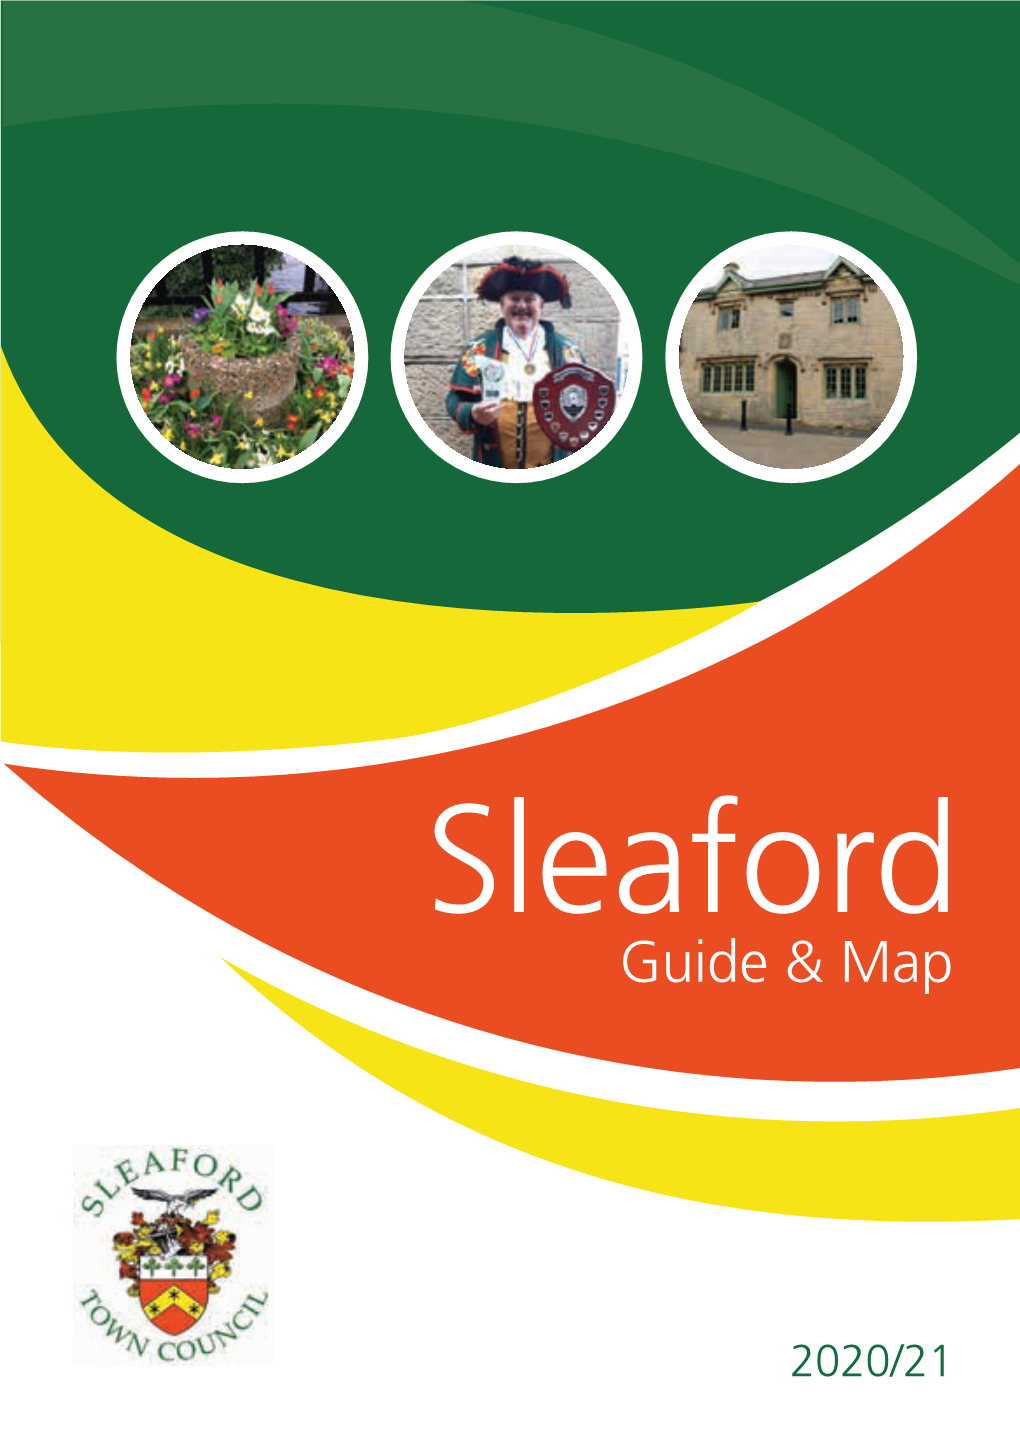 Sleaford Town Guide & Map 26.02.20 120Mm ROP 2019324 2Nd 180Mm Illustrator CC Sleaford OG AP Full Colour Yes